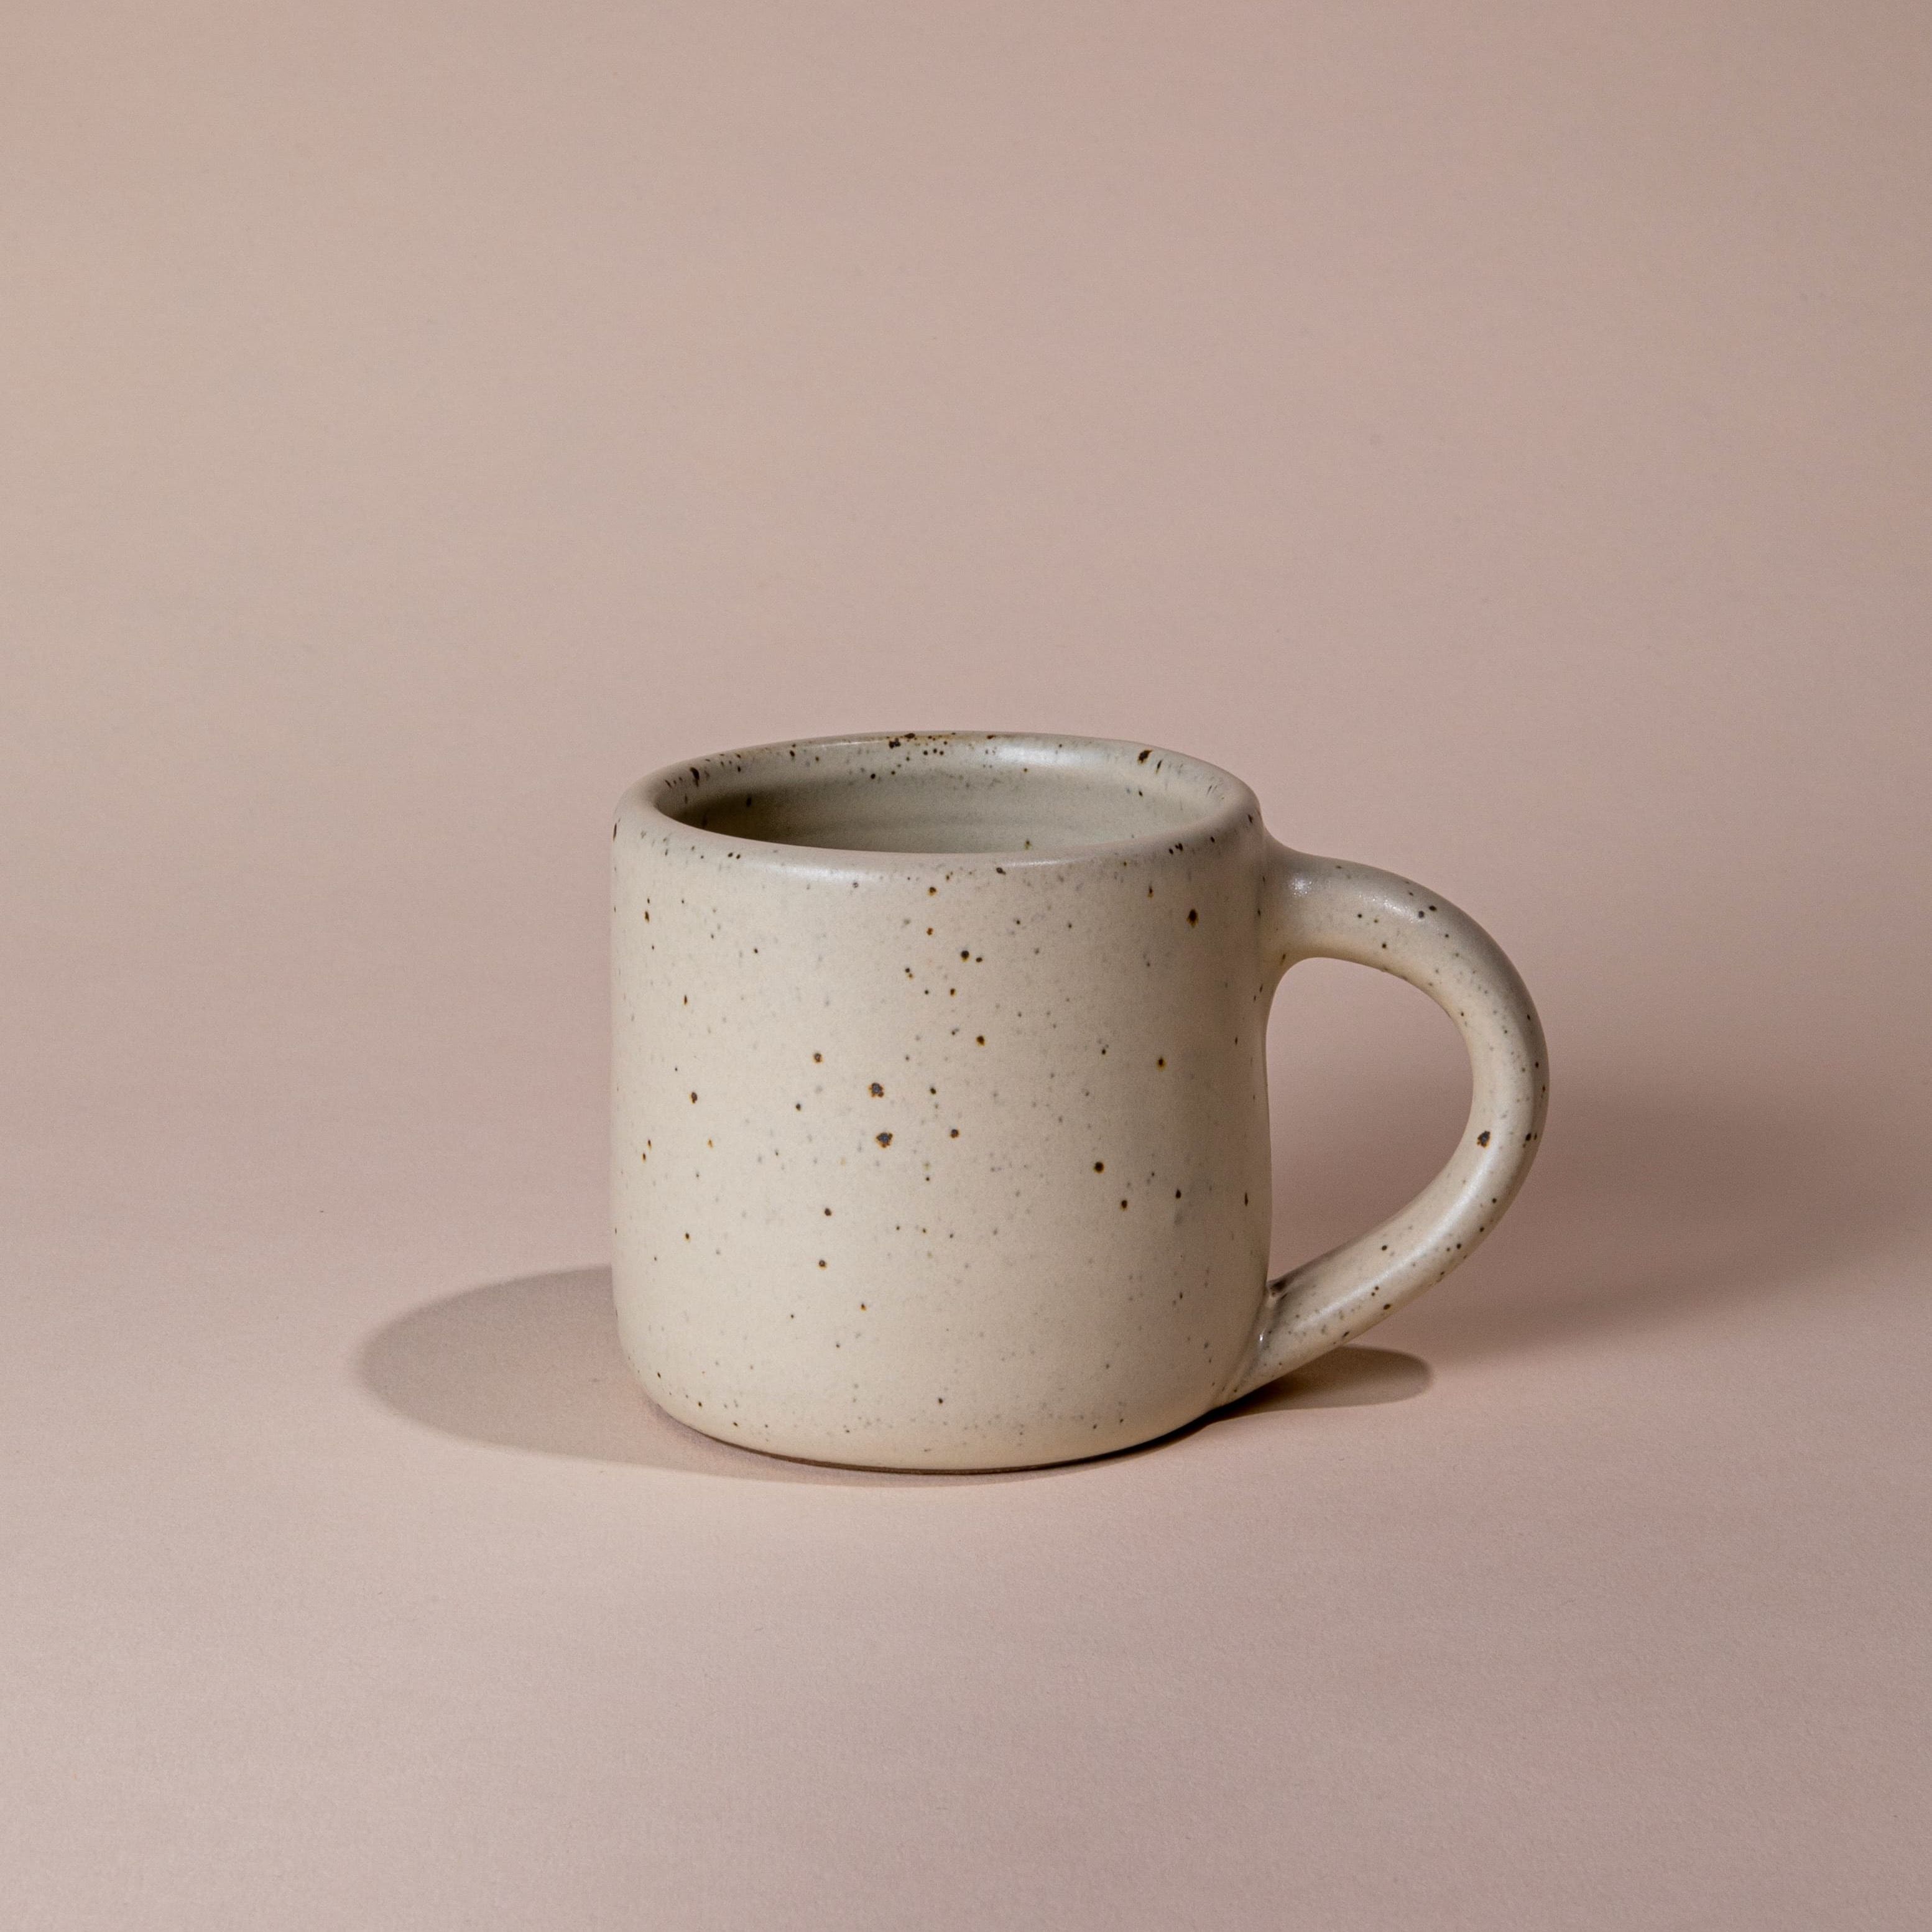 A medium sized ceramic mug with handle in a warm, tan-toned, off-white color featuring iron speckles